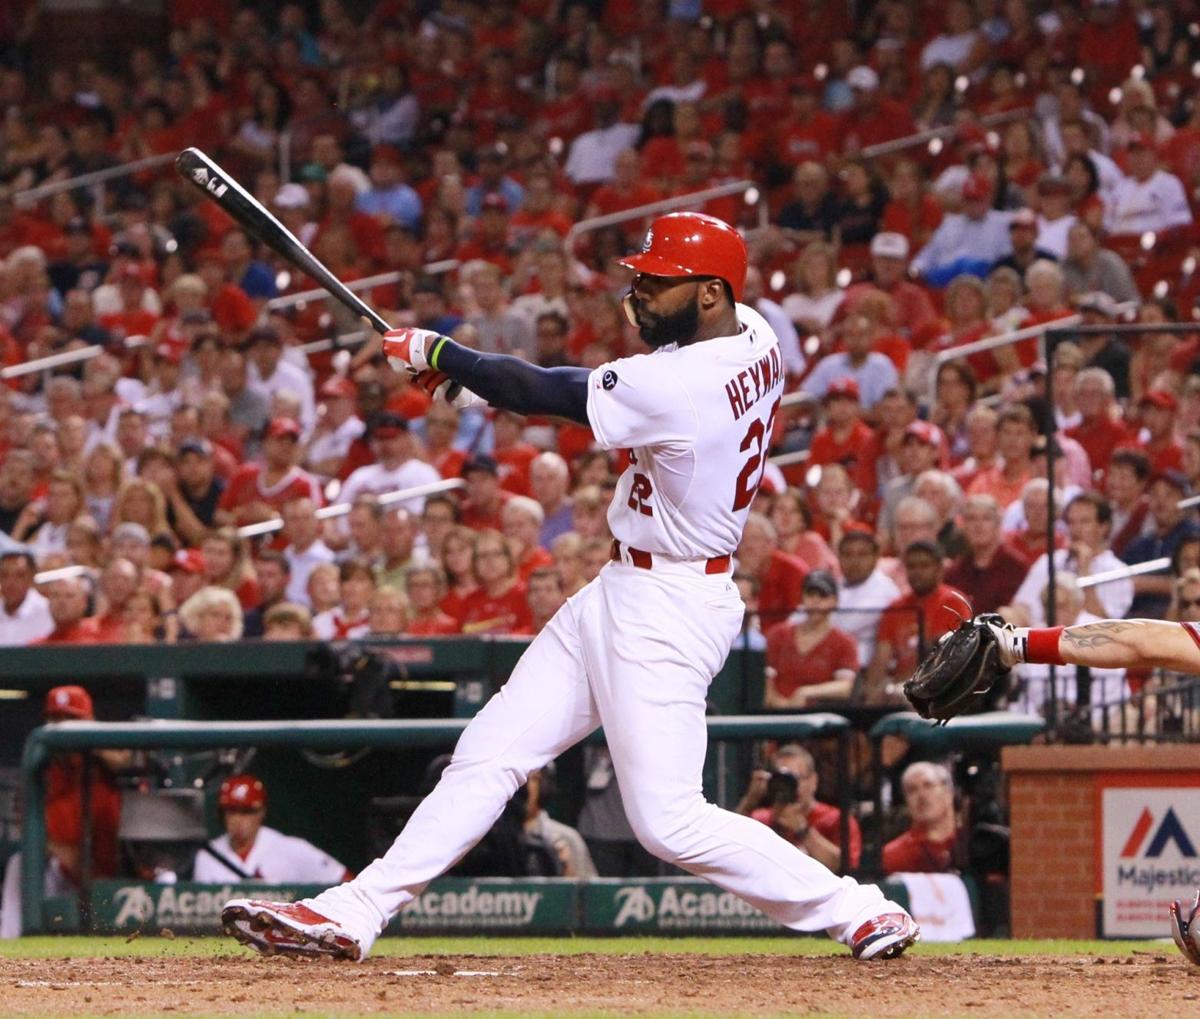 Jason Heyward - Thank you for what you have done and continue to do for the  city of Chicago!